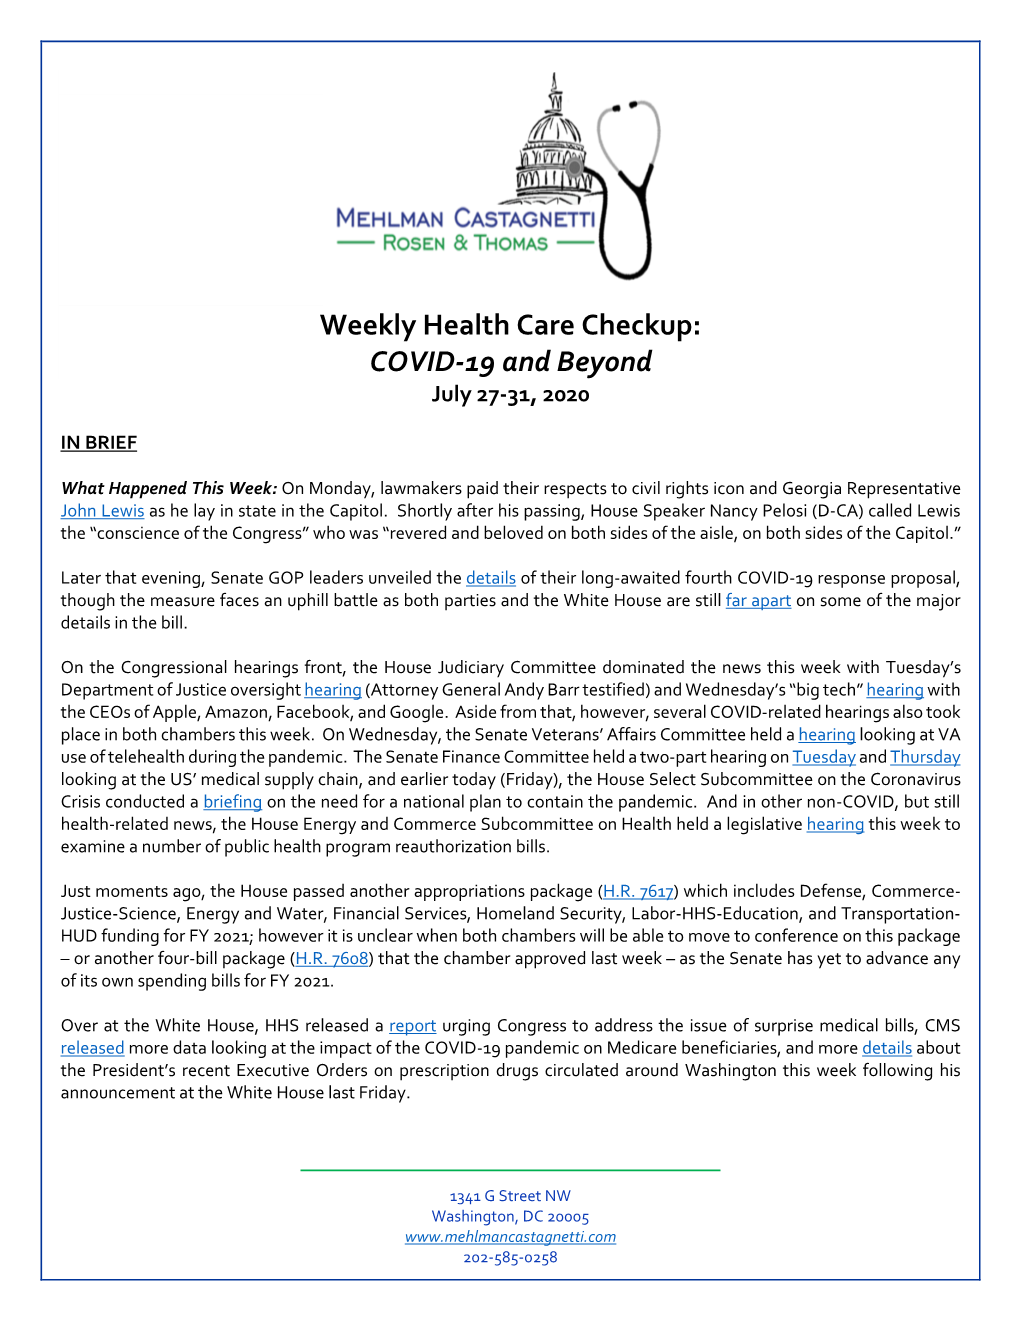 Weekly Health Care Update:COVID-19 and Beyondjune 22-26, 2020